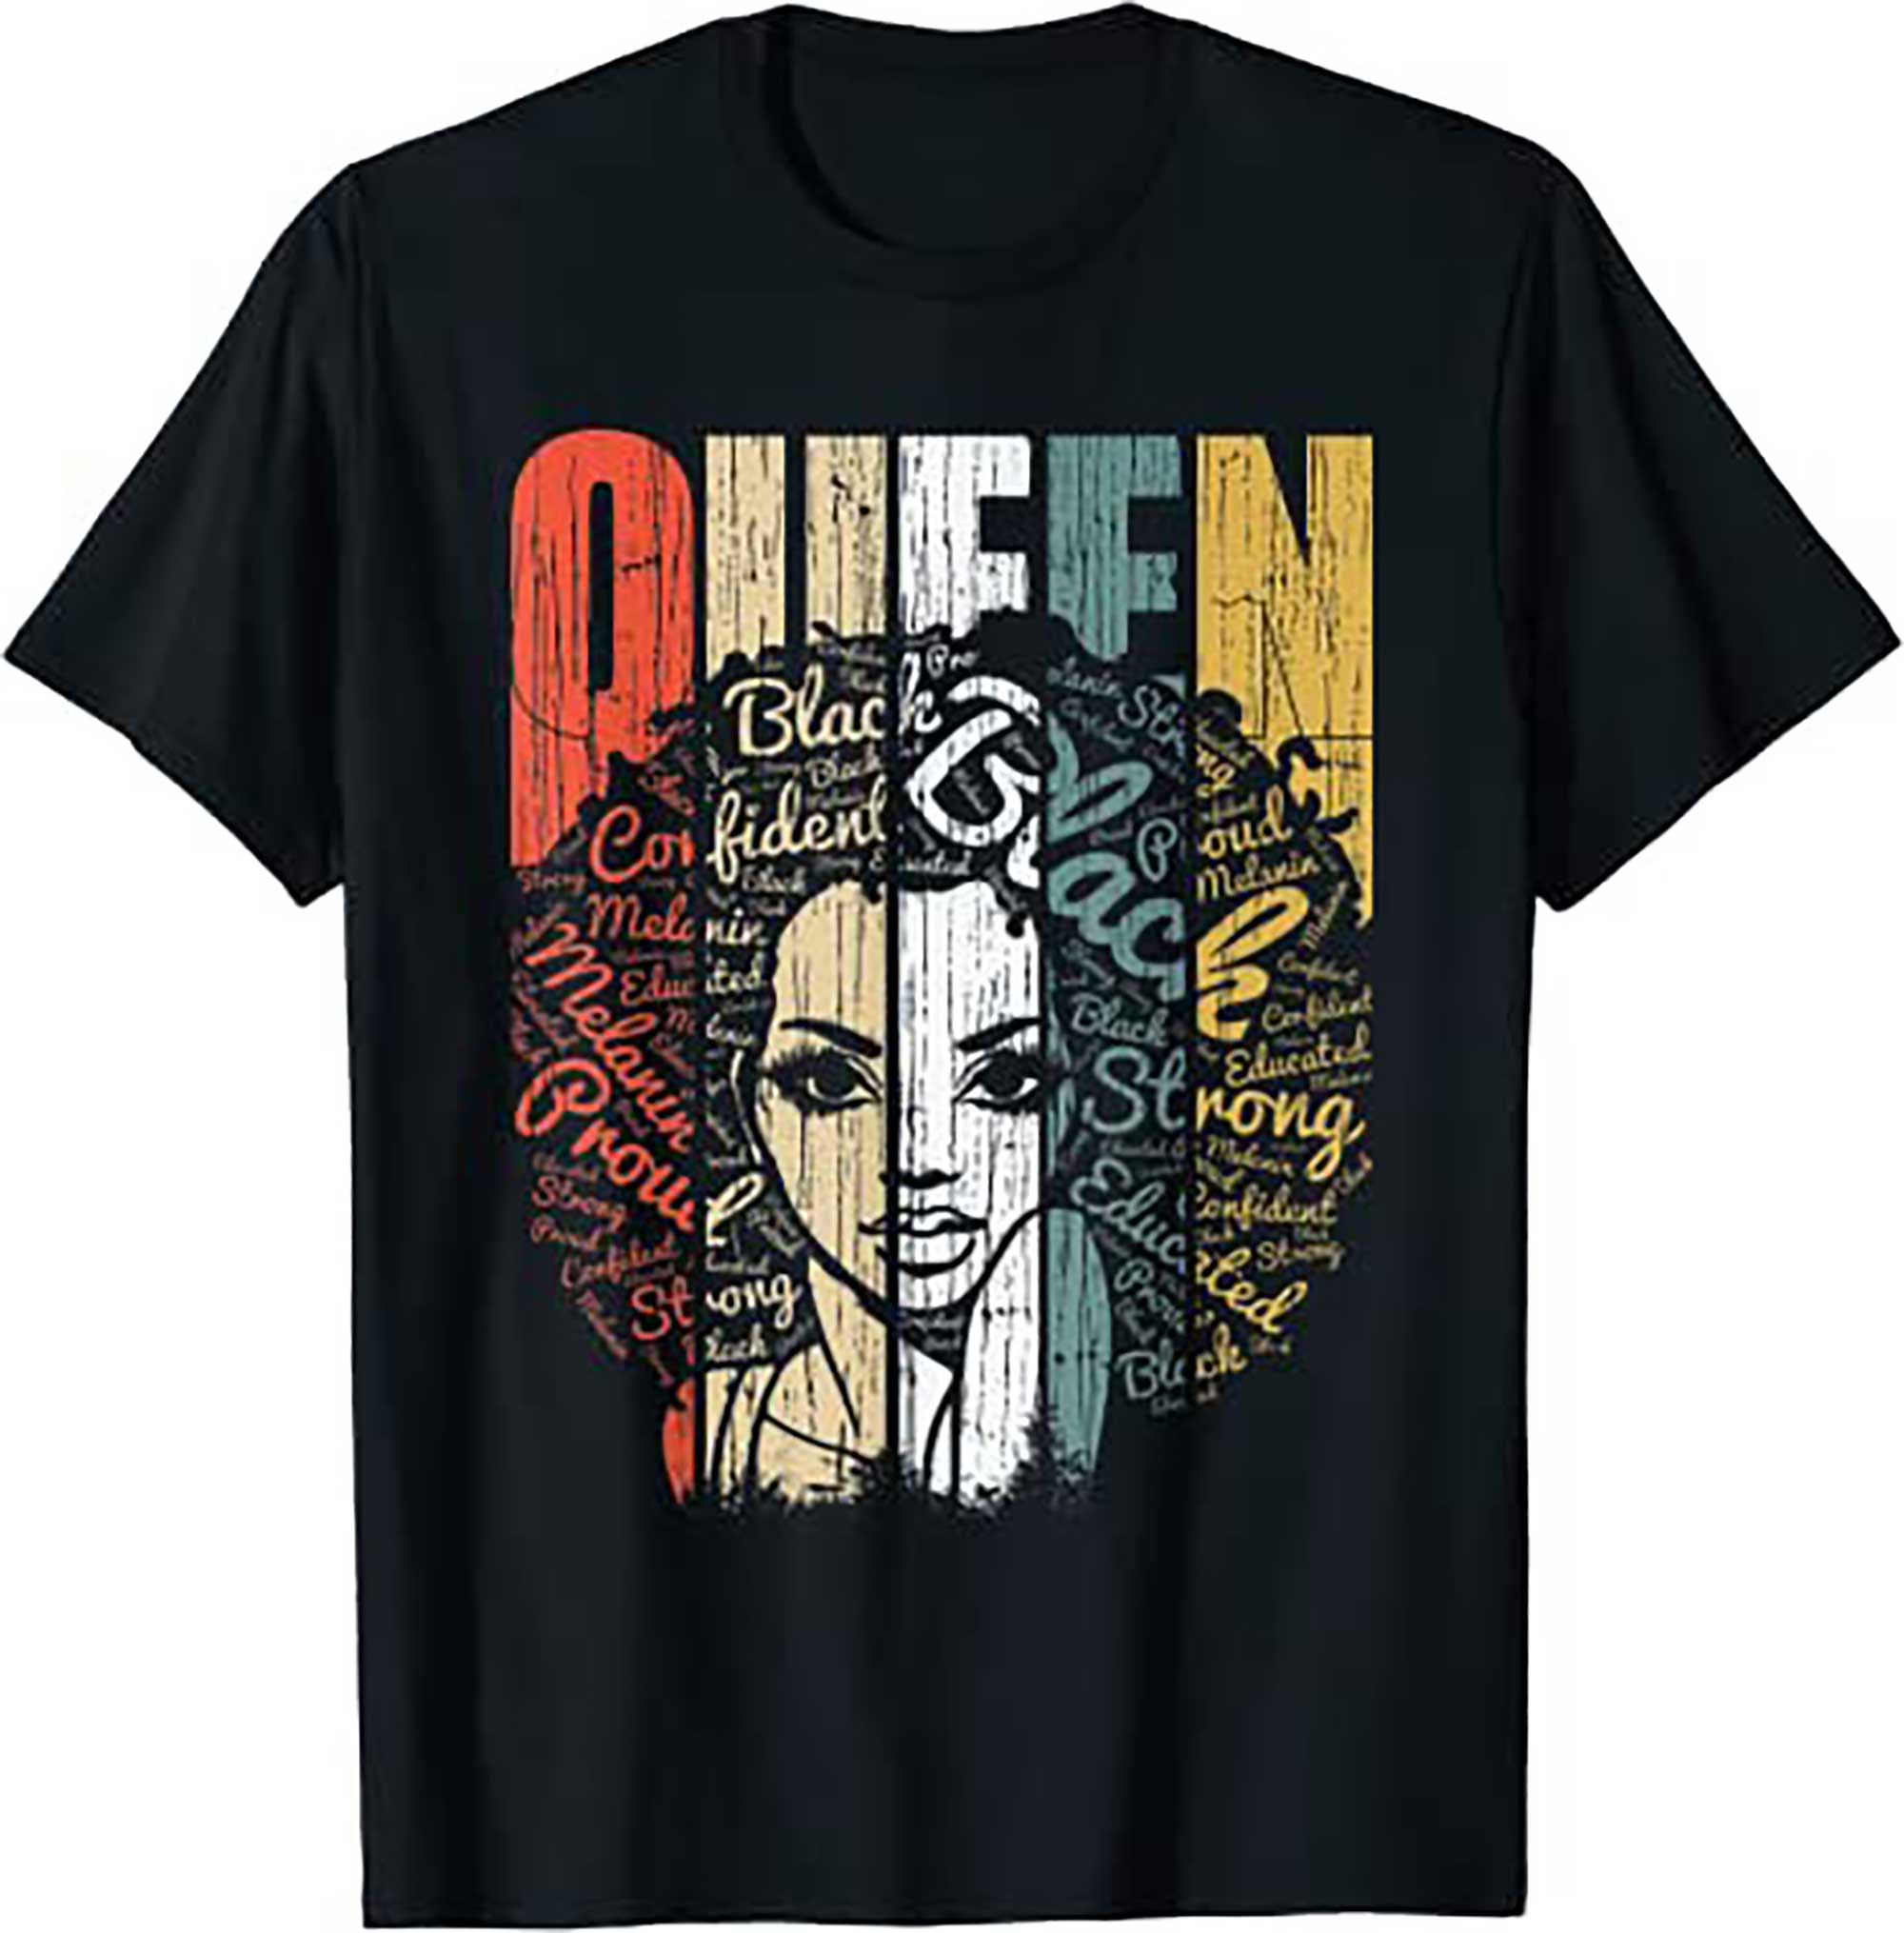 Skitongifts Black History Shirts For Women Educated Strong Black Queen T Shirt